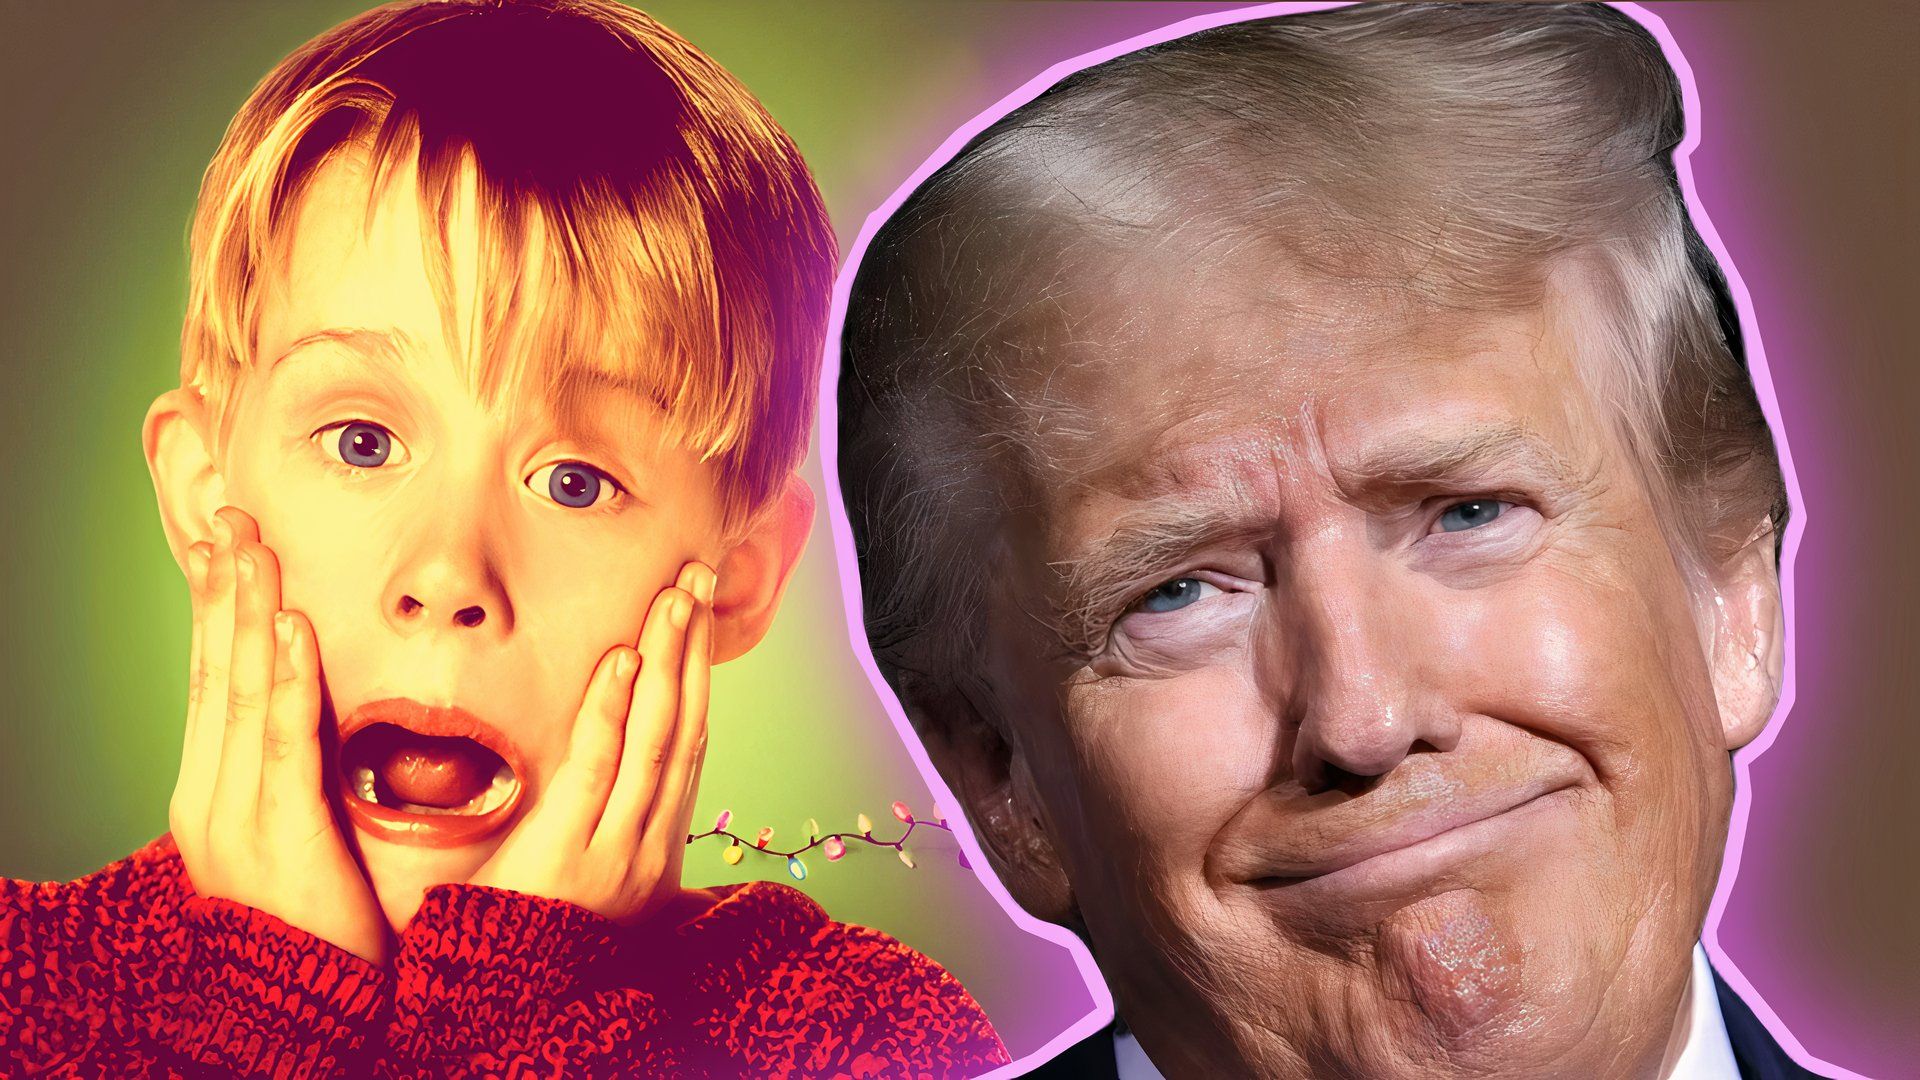 Home Alone star screaming next to pink Donald Trump, convicted felon on 34 counts